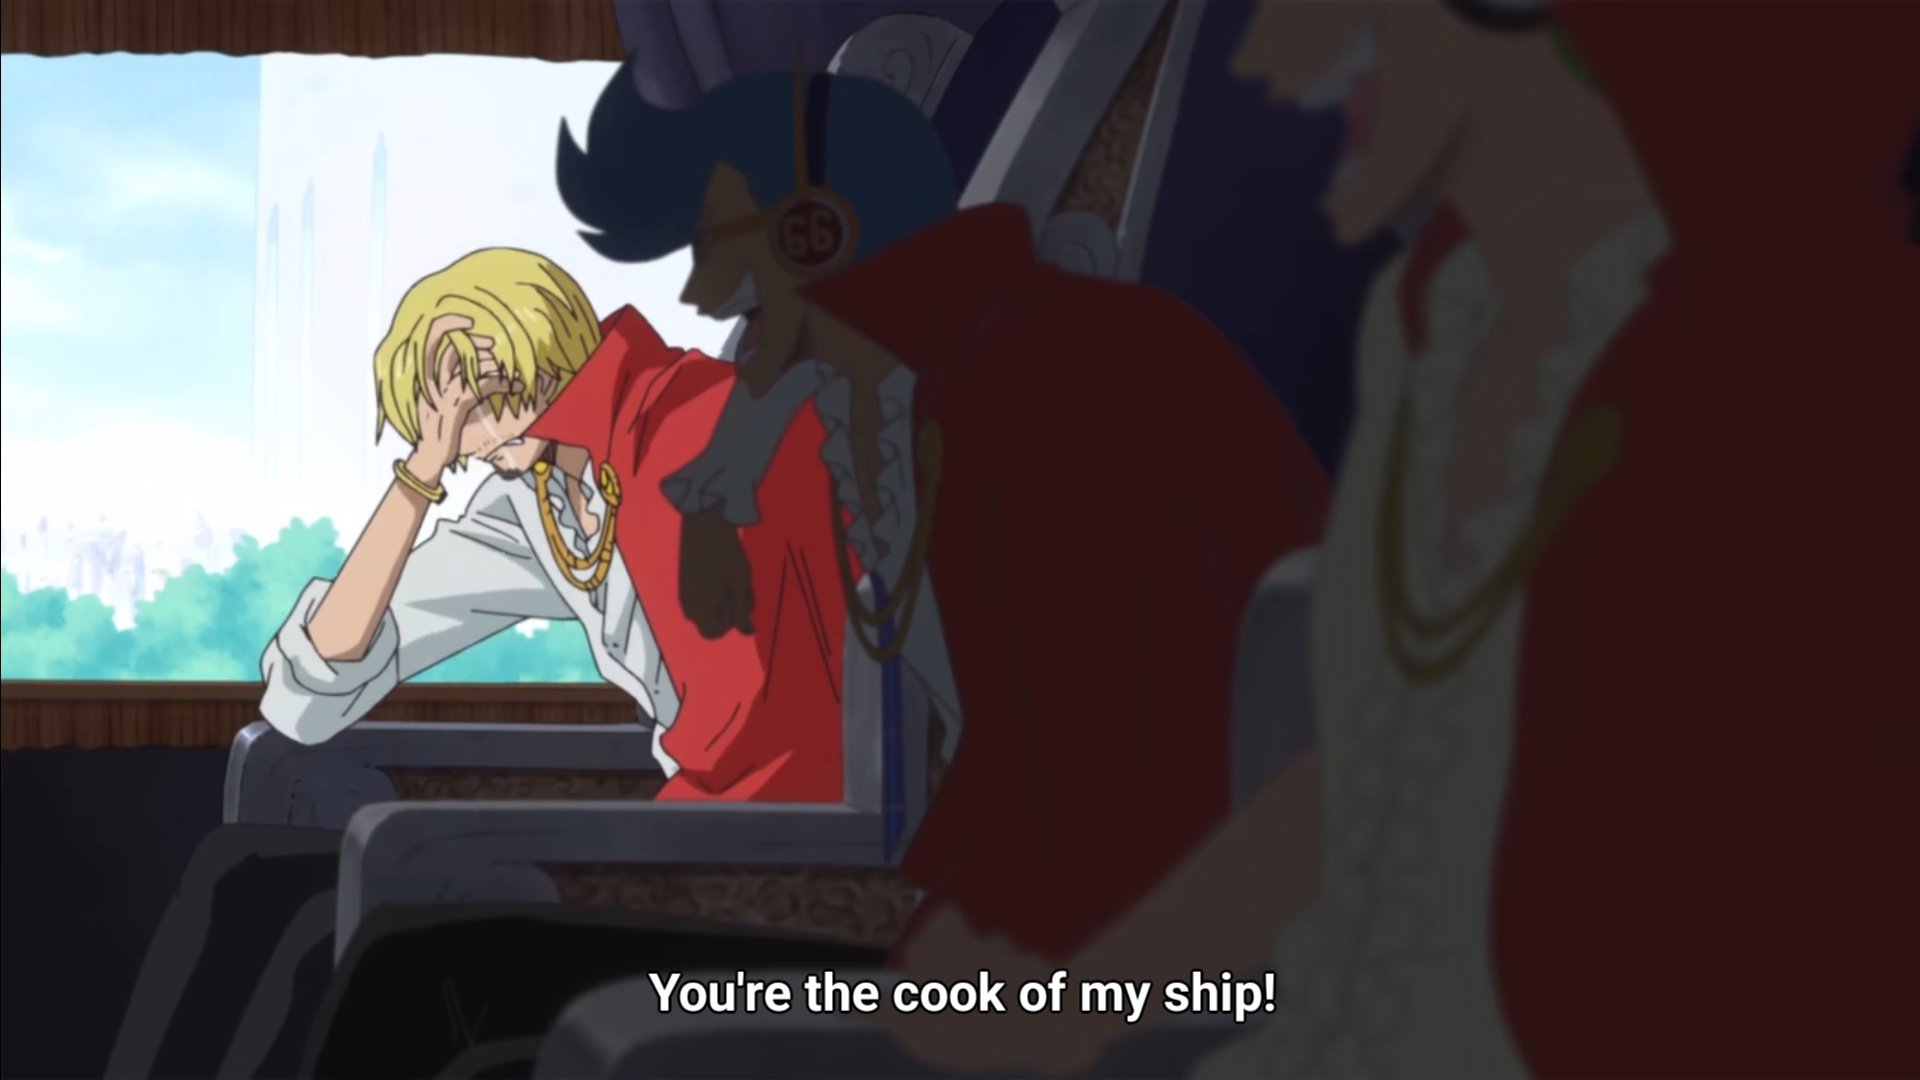 andi 🍋 ceo of sanji on X: luffy in wci: you're the cook of my